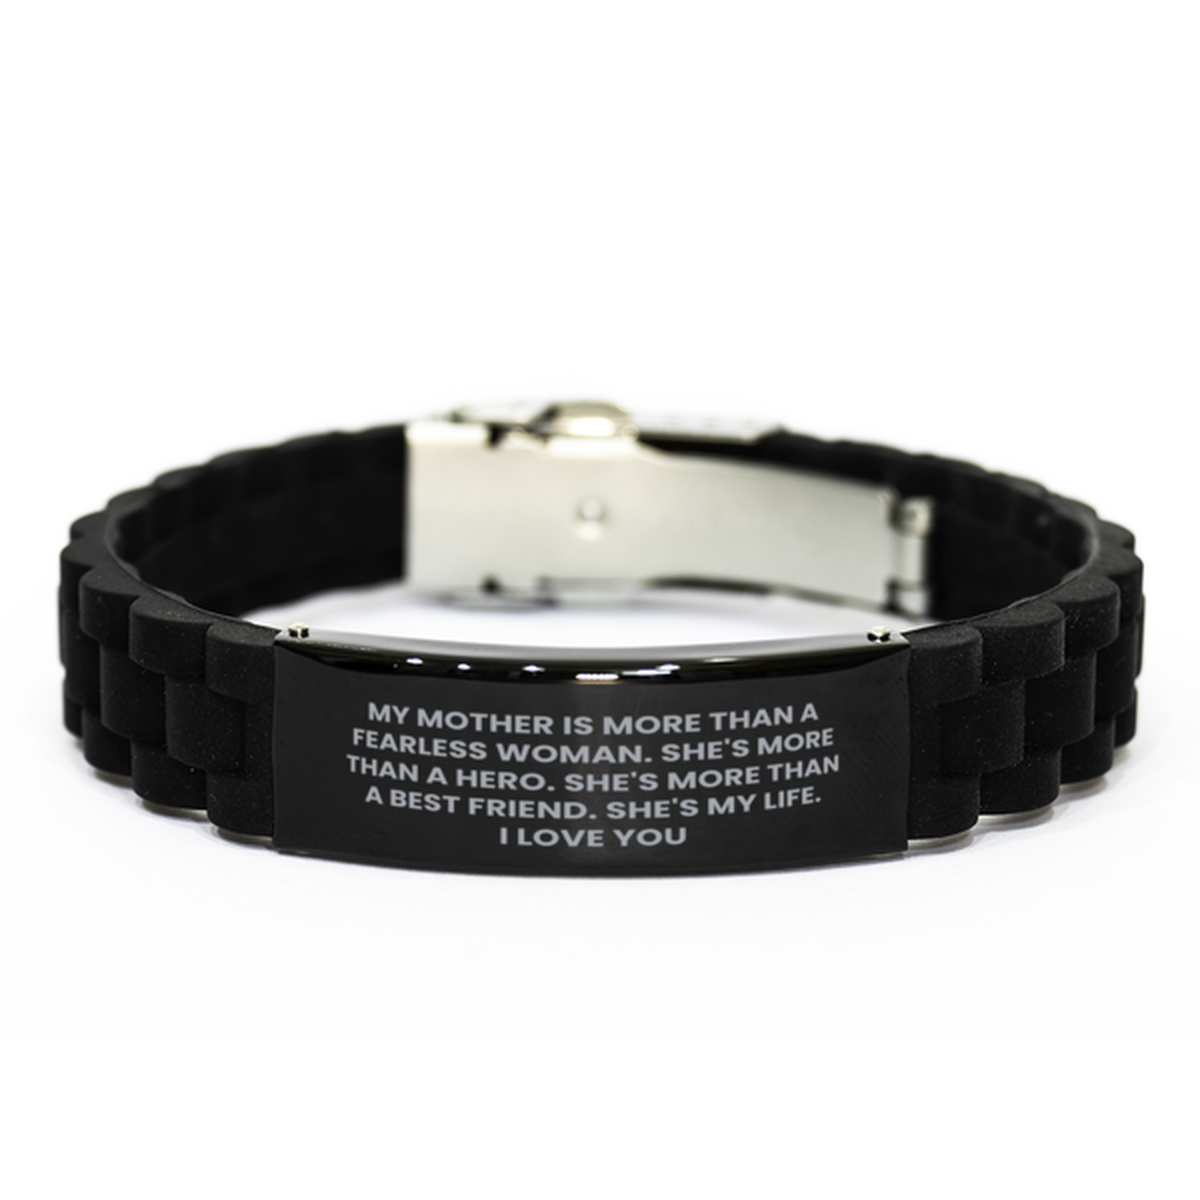 To My Mother Black Bracelet, She's More Than A Hero, Mothers Day Gifts For Mother From Son, Birthday Gifts For Women